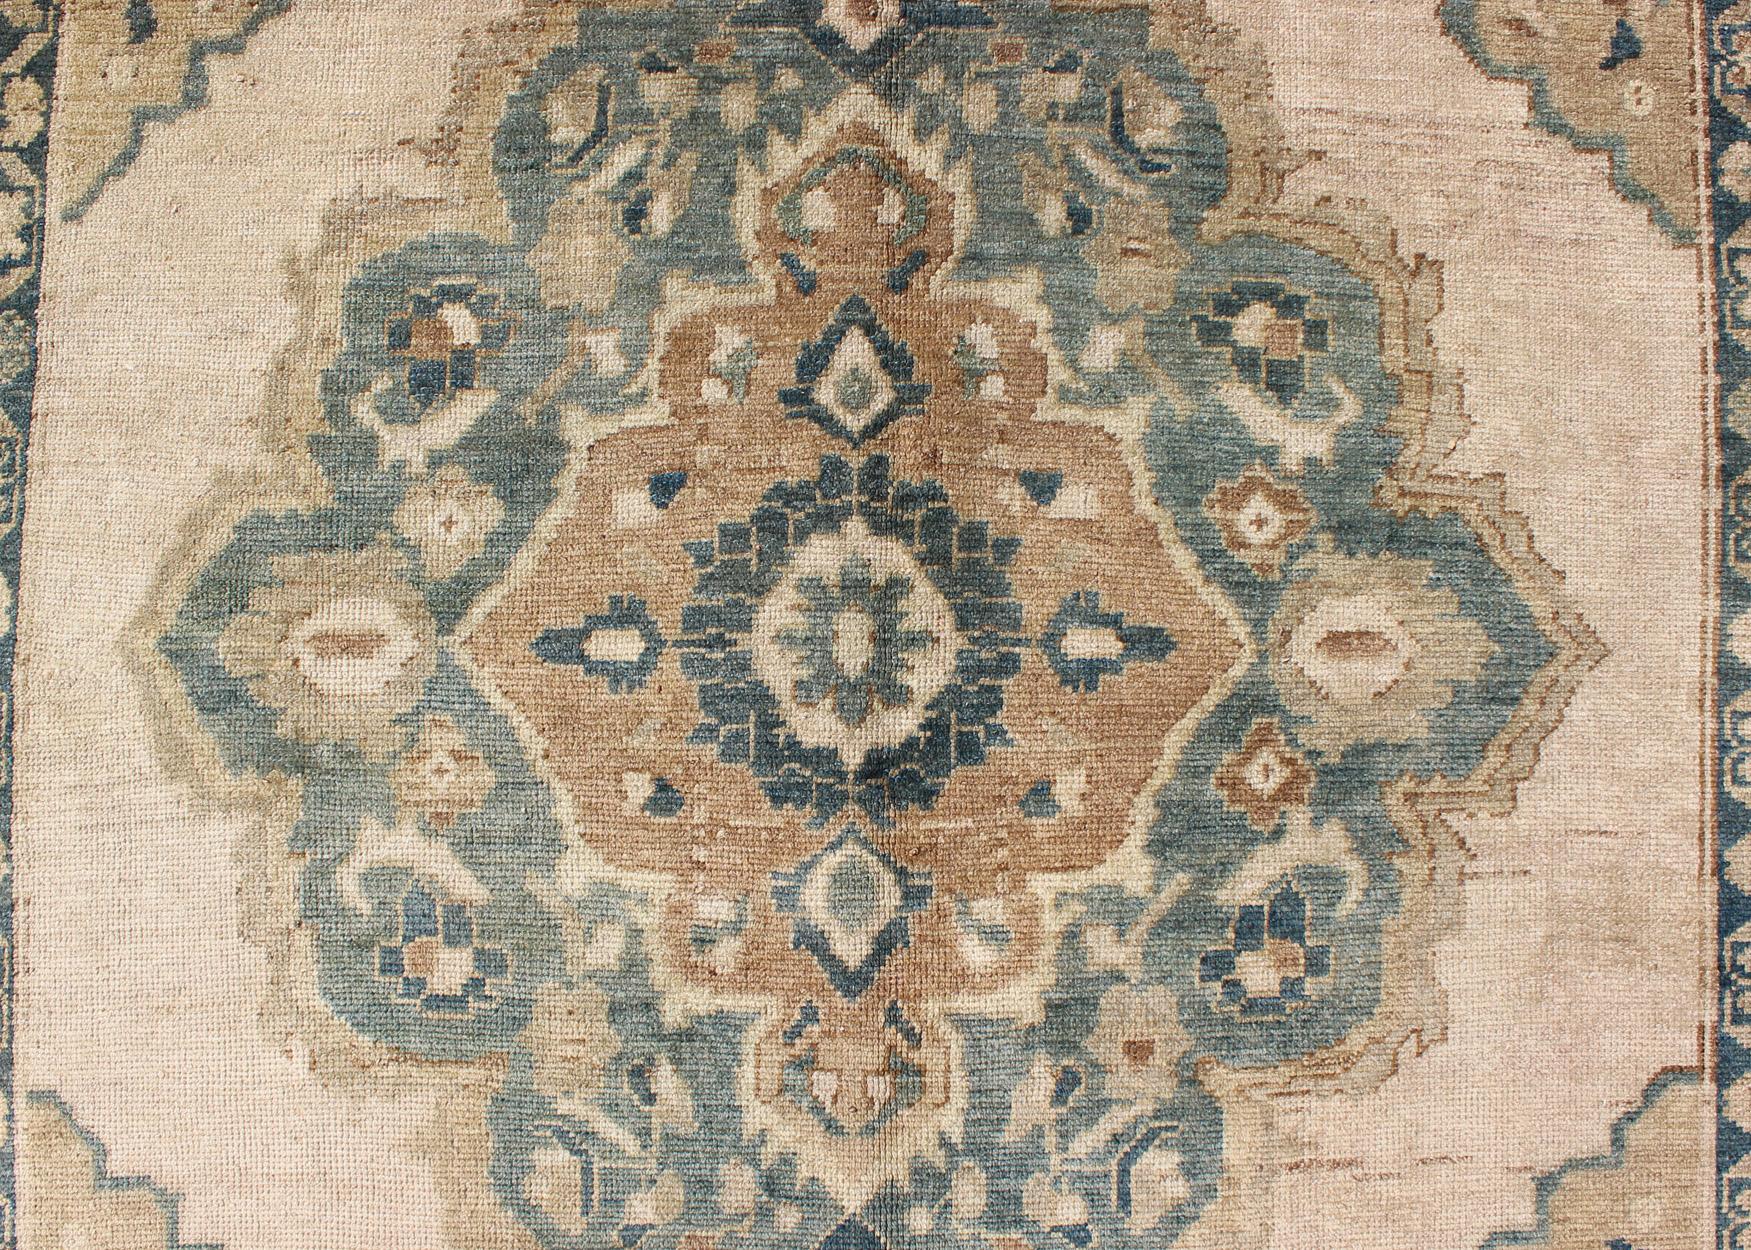 Vintage Oushak Rug with Floral Design in Blue/Green, Taupe, Ivory & Yellow Green In Good Condition For Sale In Atlanta, GA